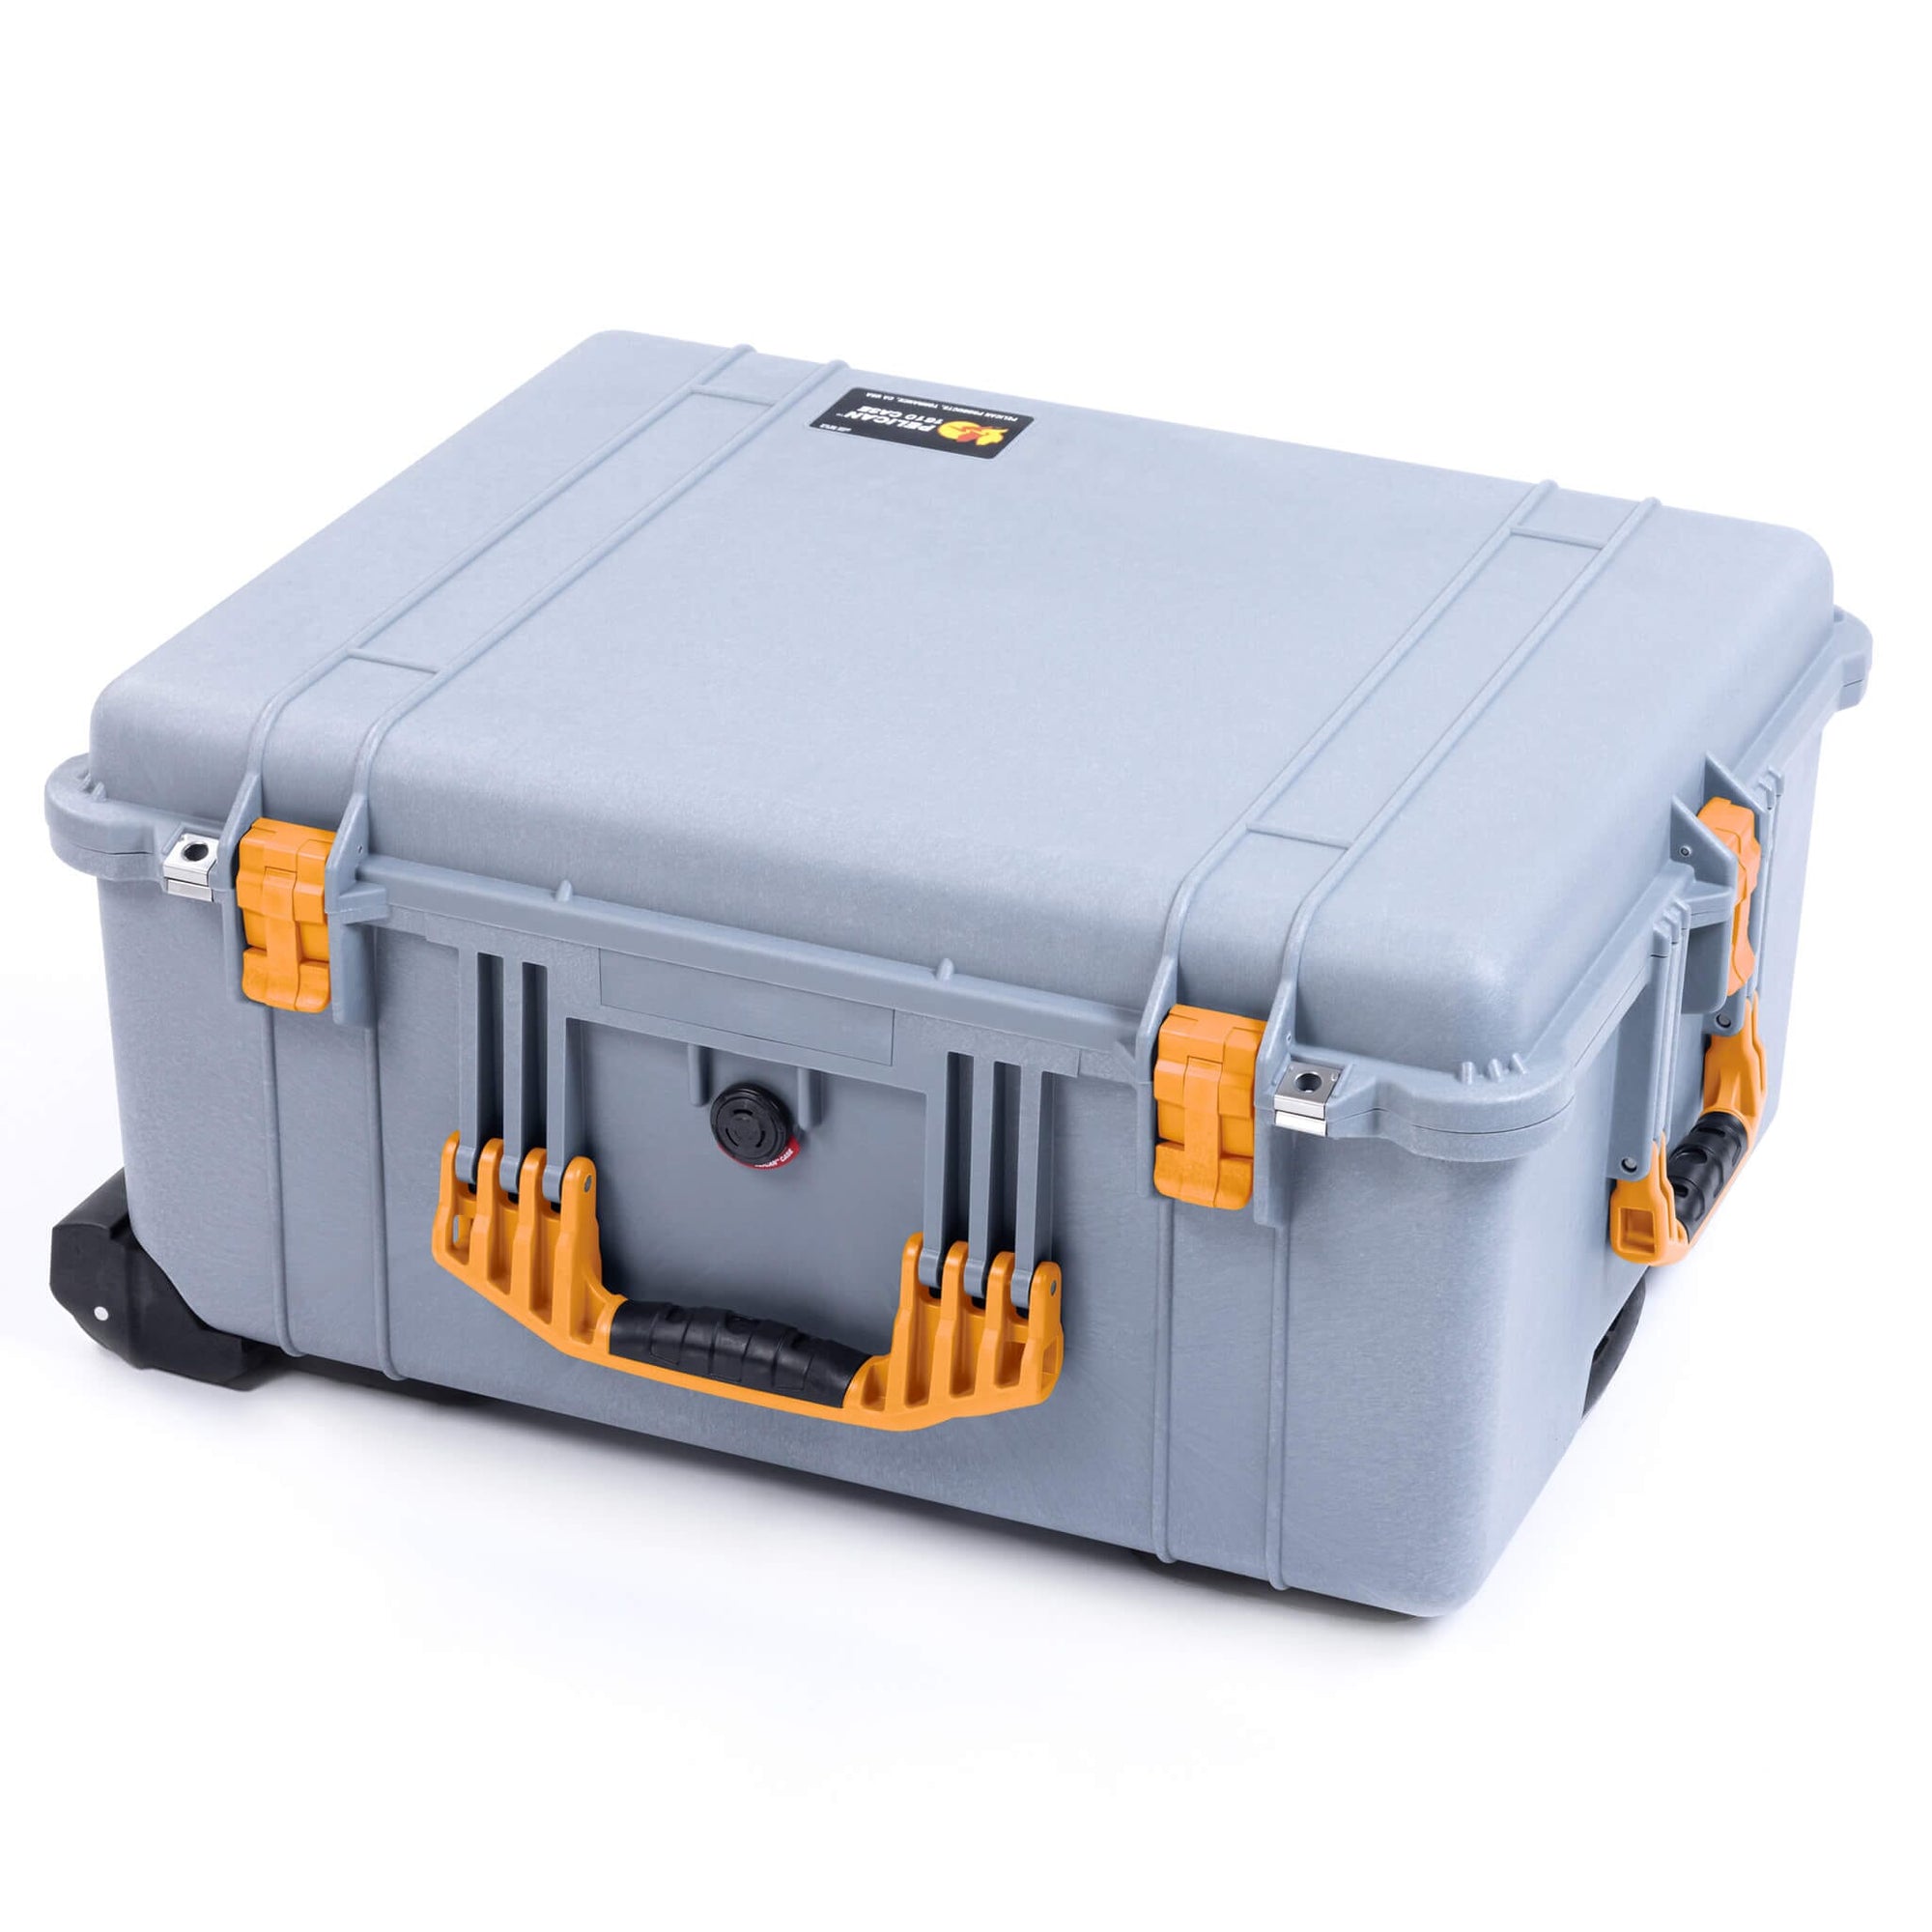 Pelican 1610 Case, Silver with Yellow Handles and Latches